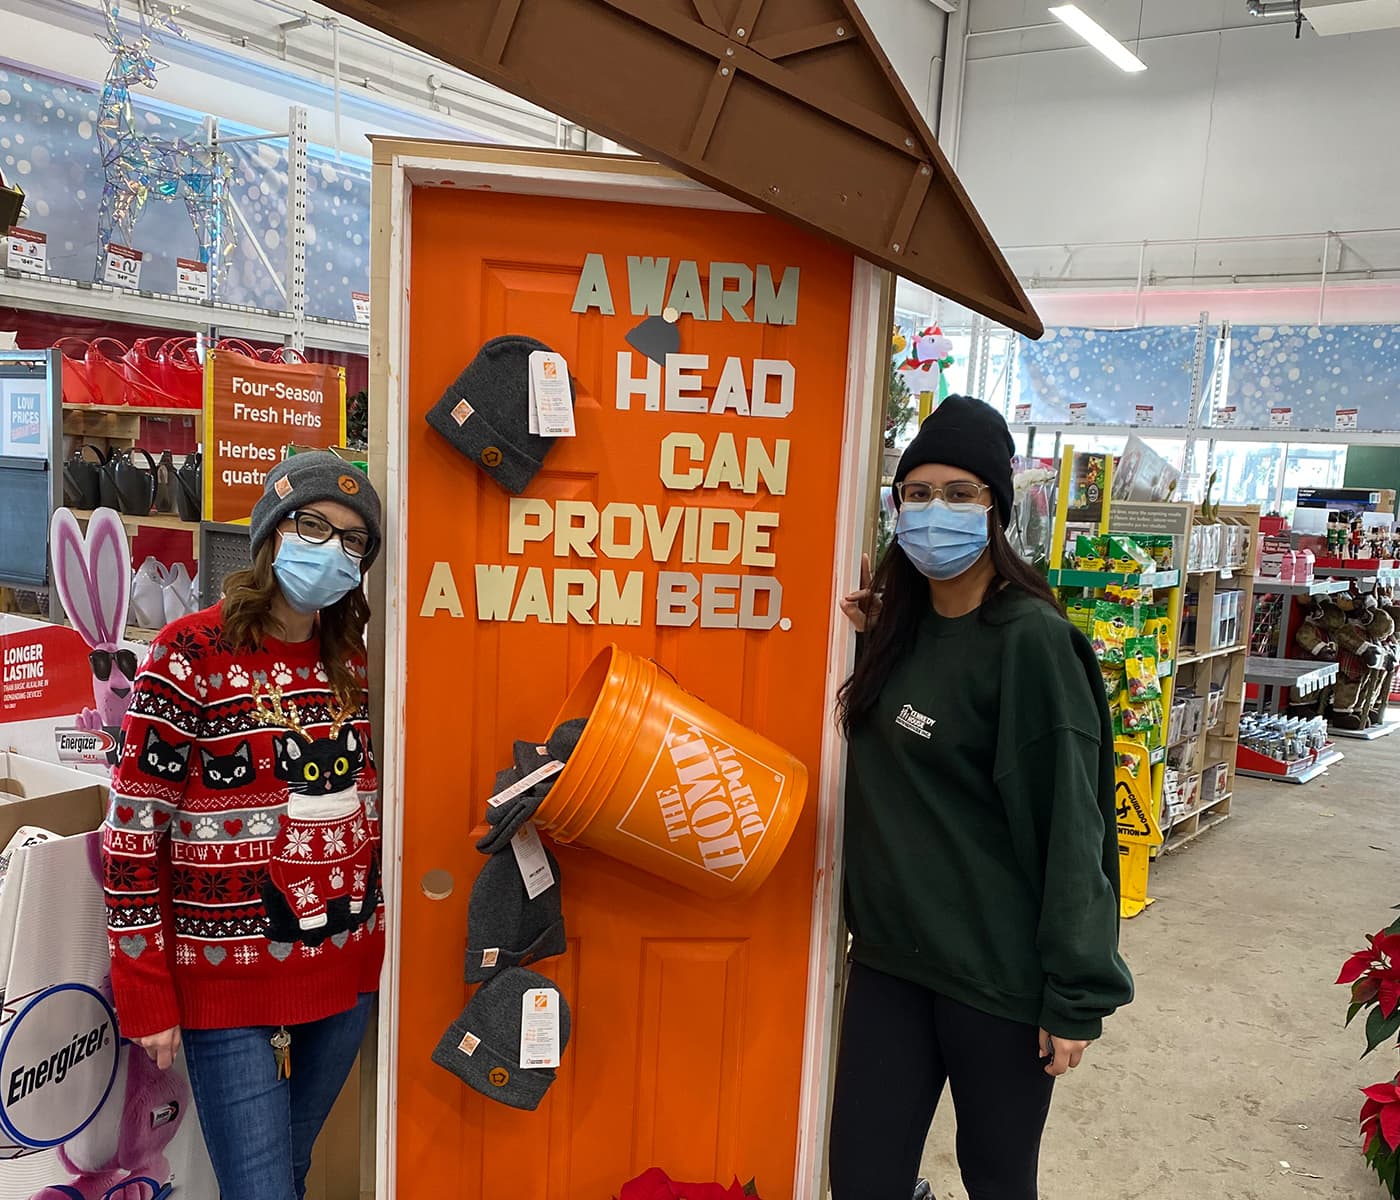 Two women standing in front of an orange door that says "A warm head can provide a warm bed"